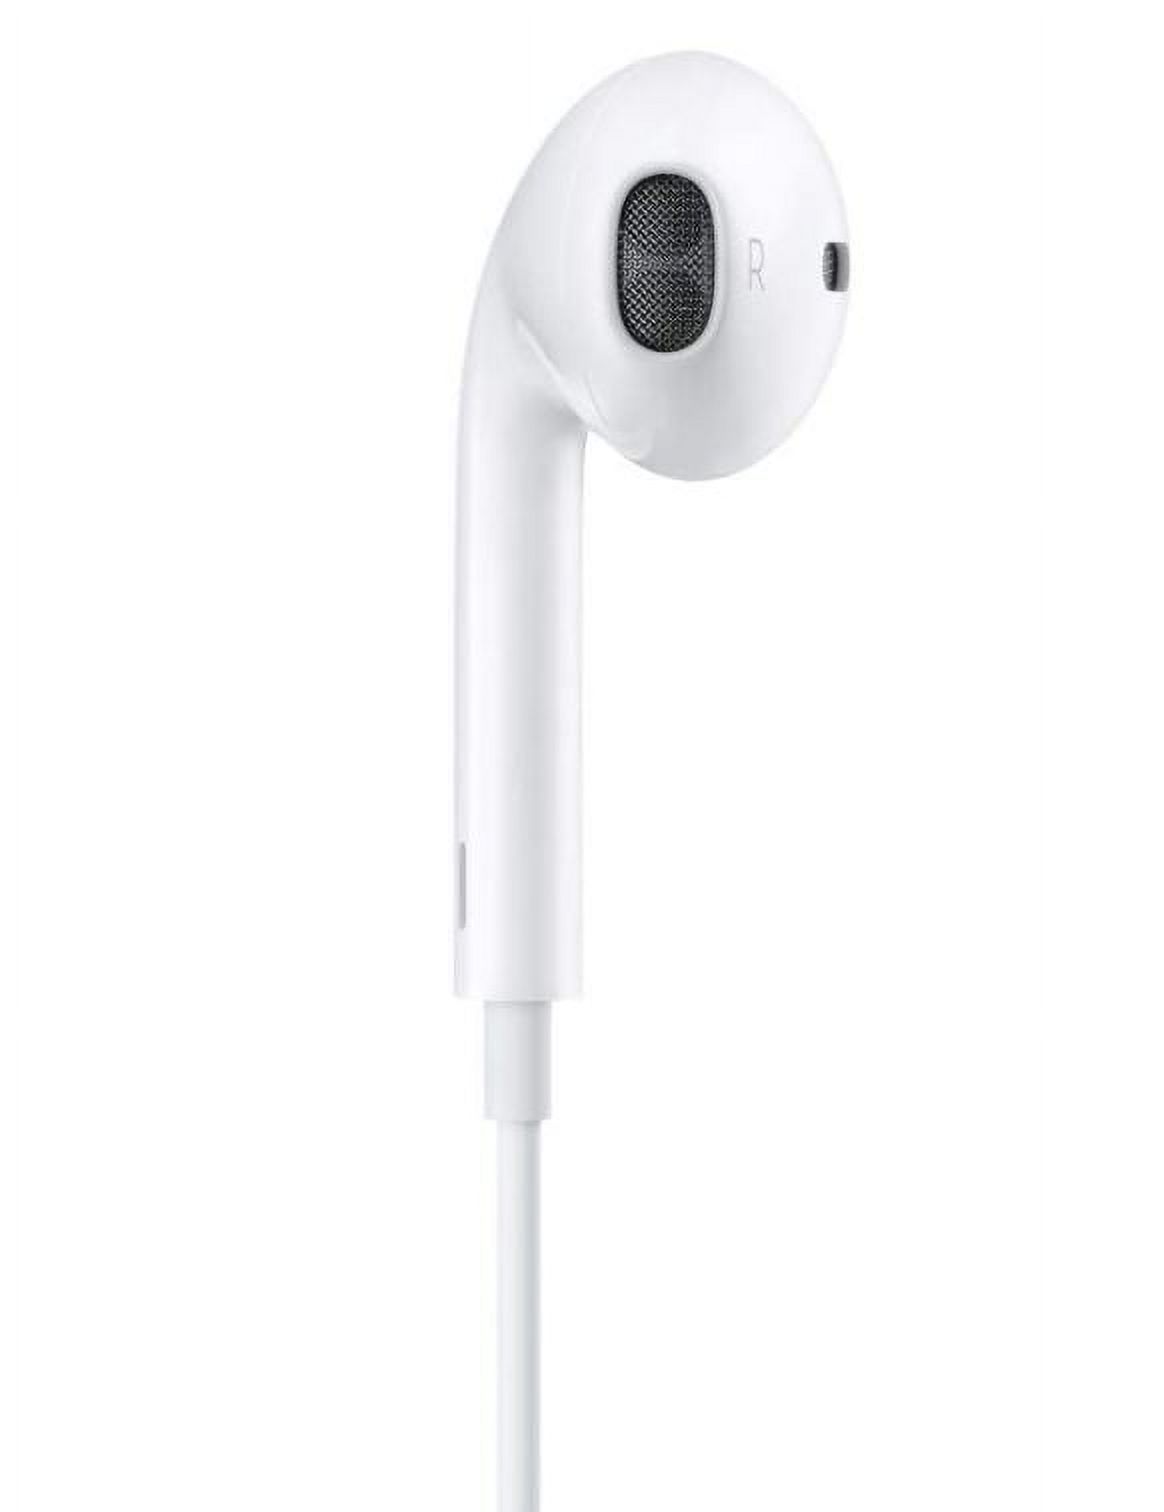 Apple In-Ear Headphones, White, MD827LL/A - image 3 of 4